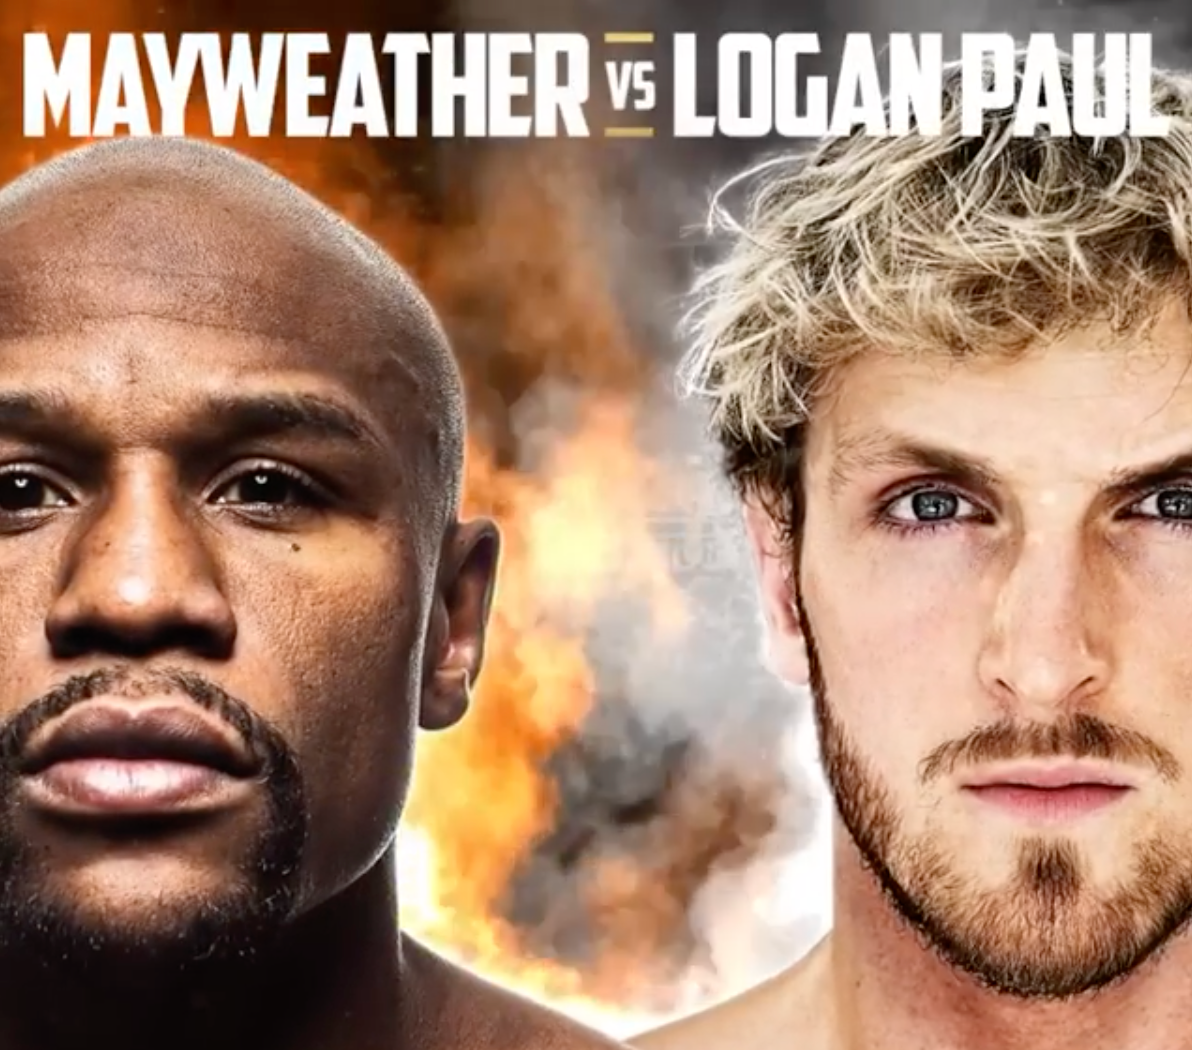 Floyd Mayweather is set to face YouTuber Logan Paul in 2021